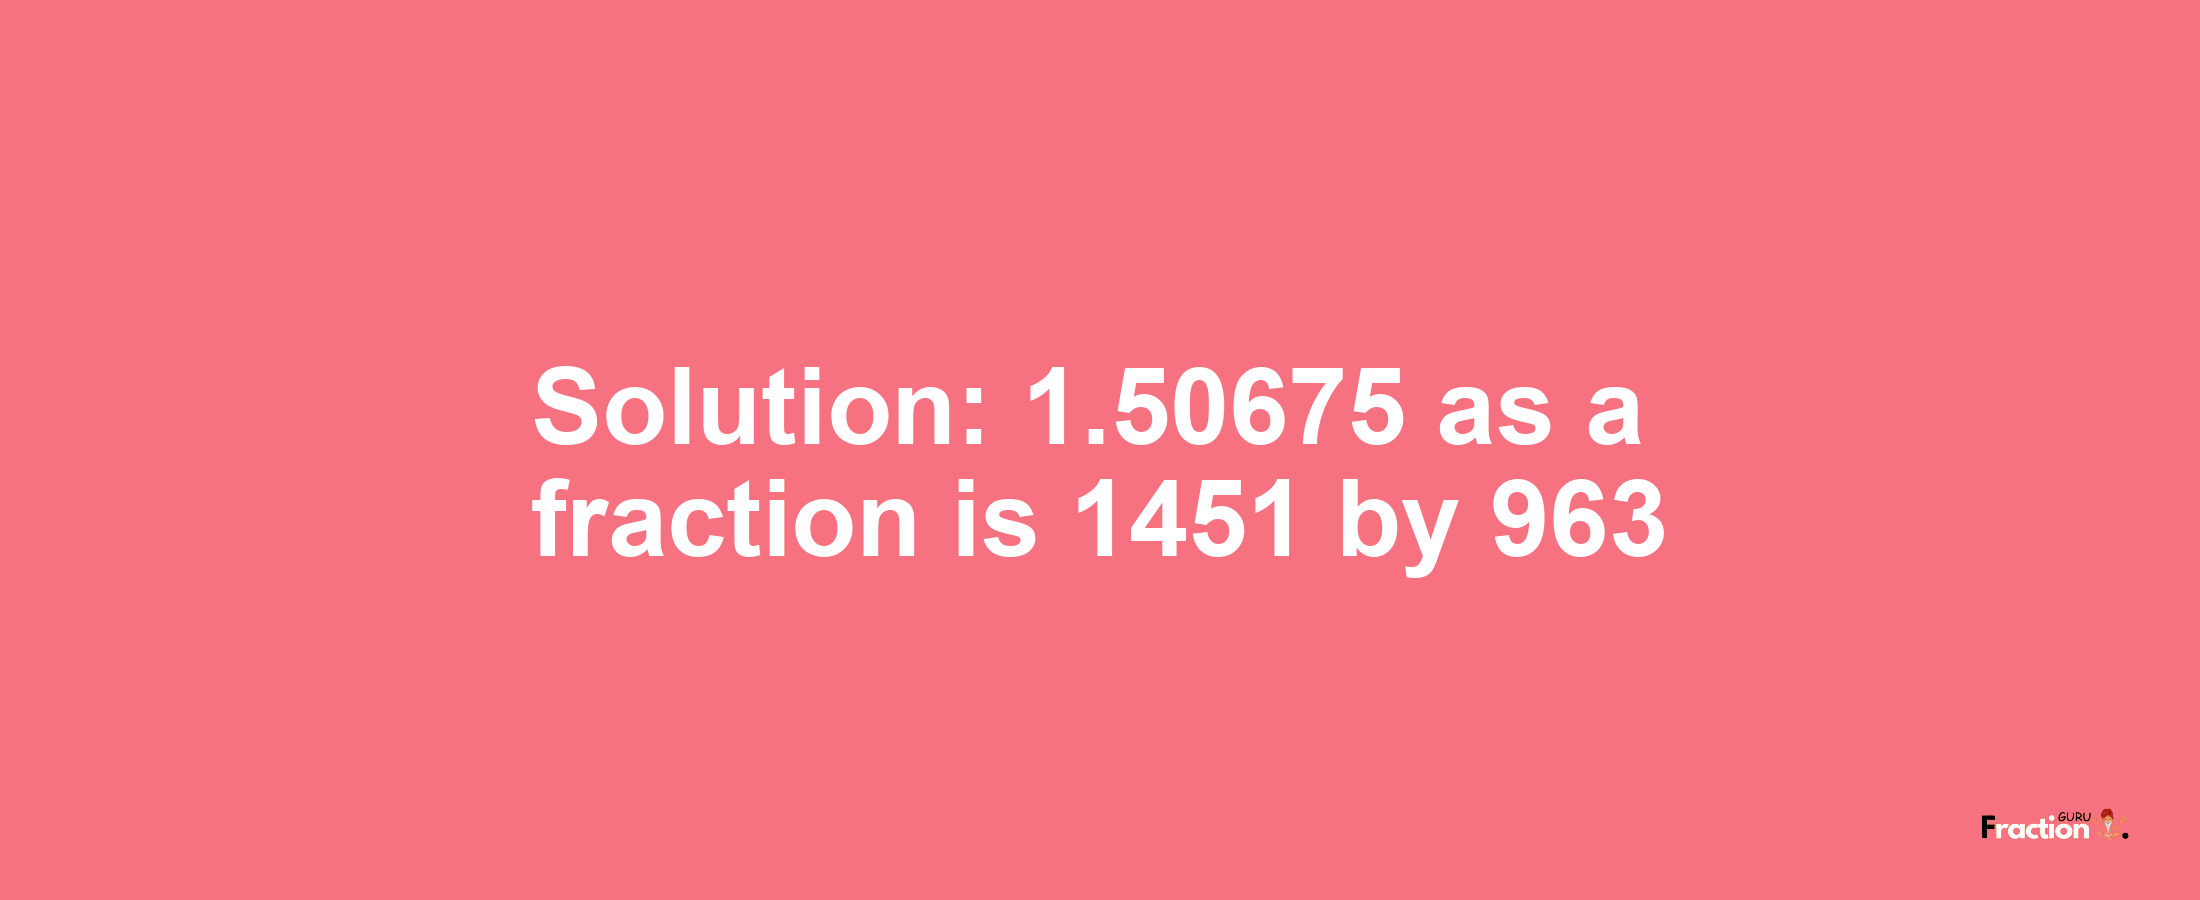 Solution:1.50675 as a fraction is 1451/963